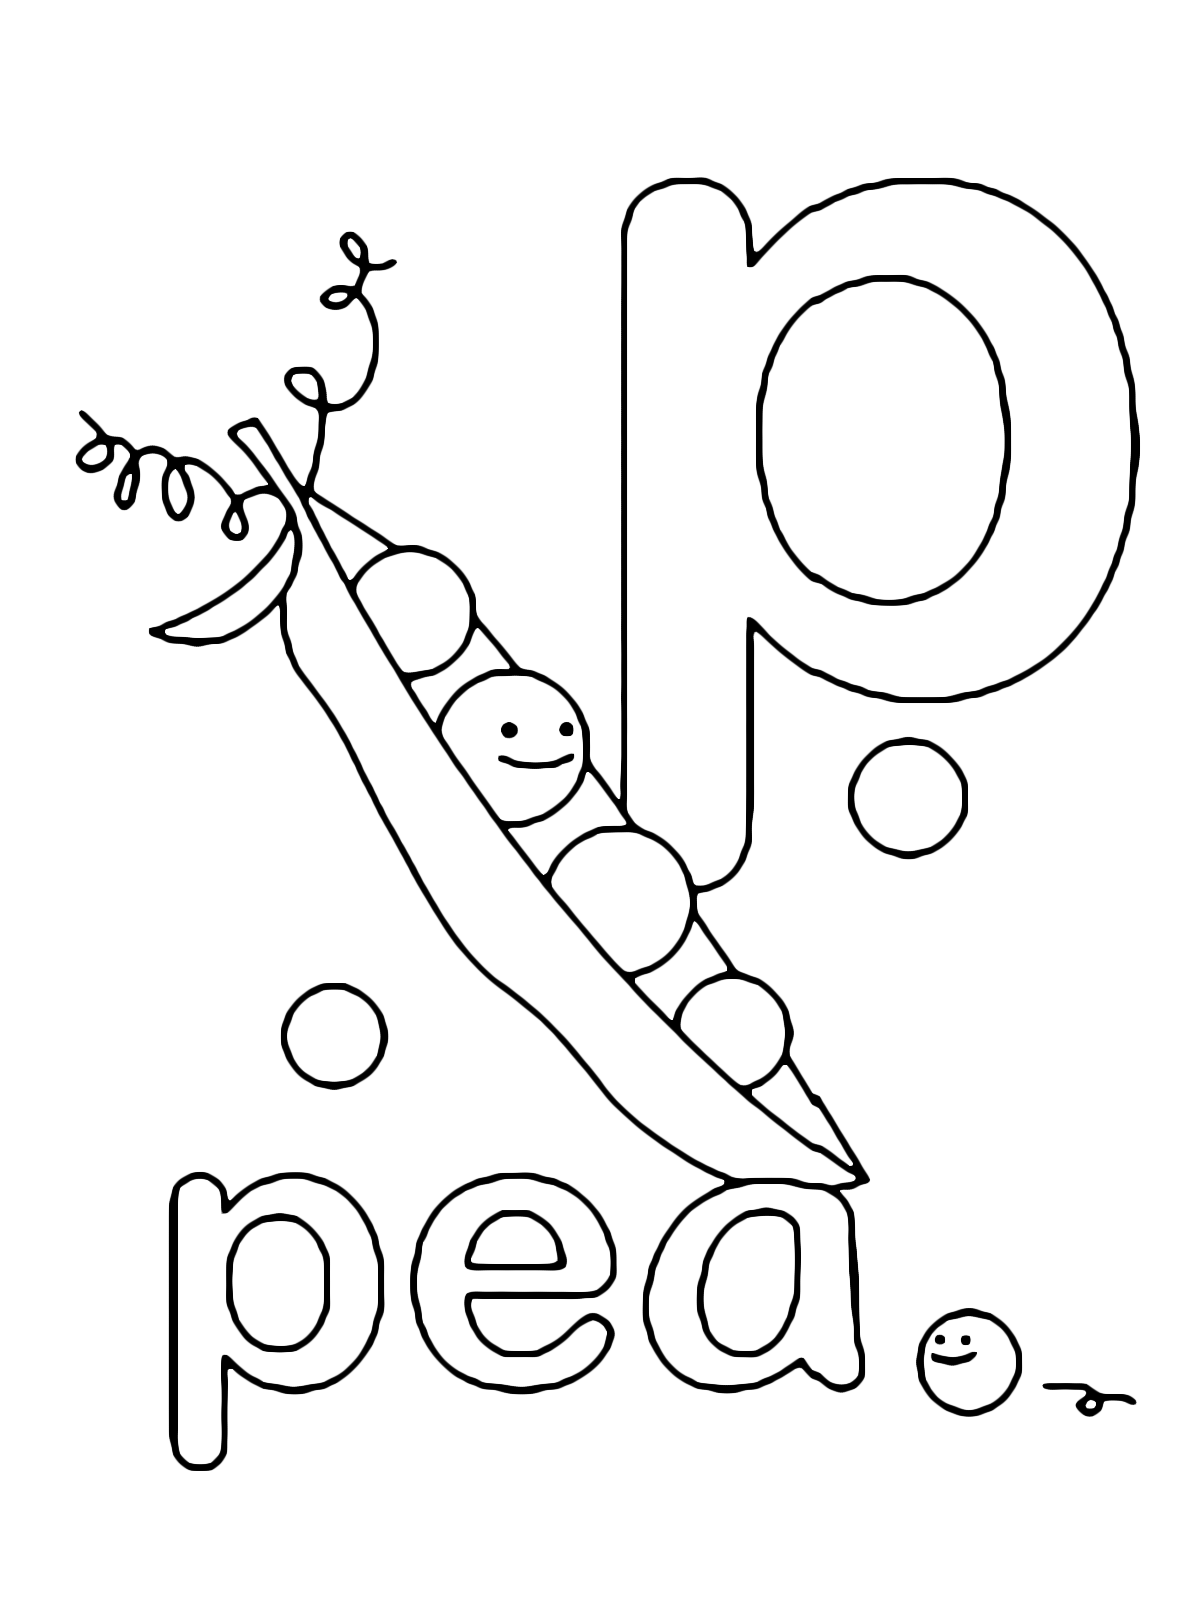 Letters and numbers - p for pea lowercase letter